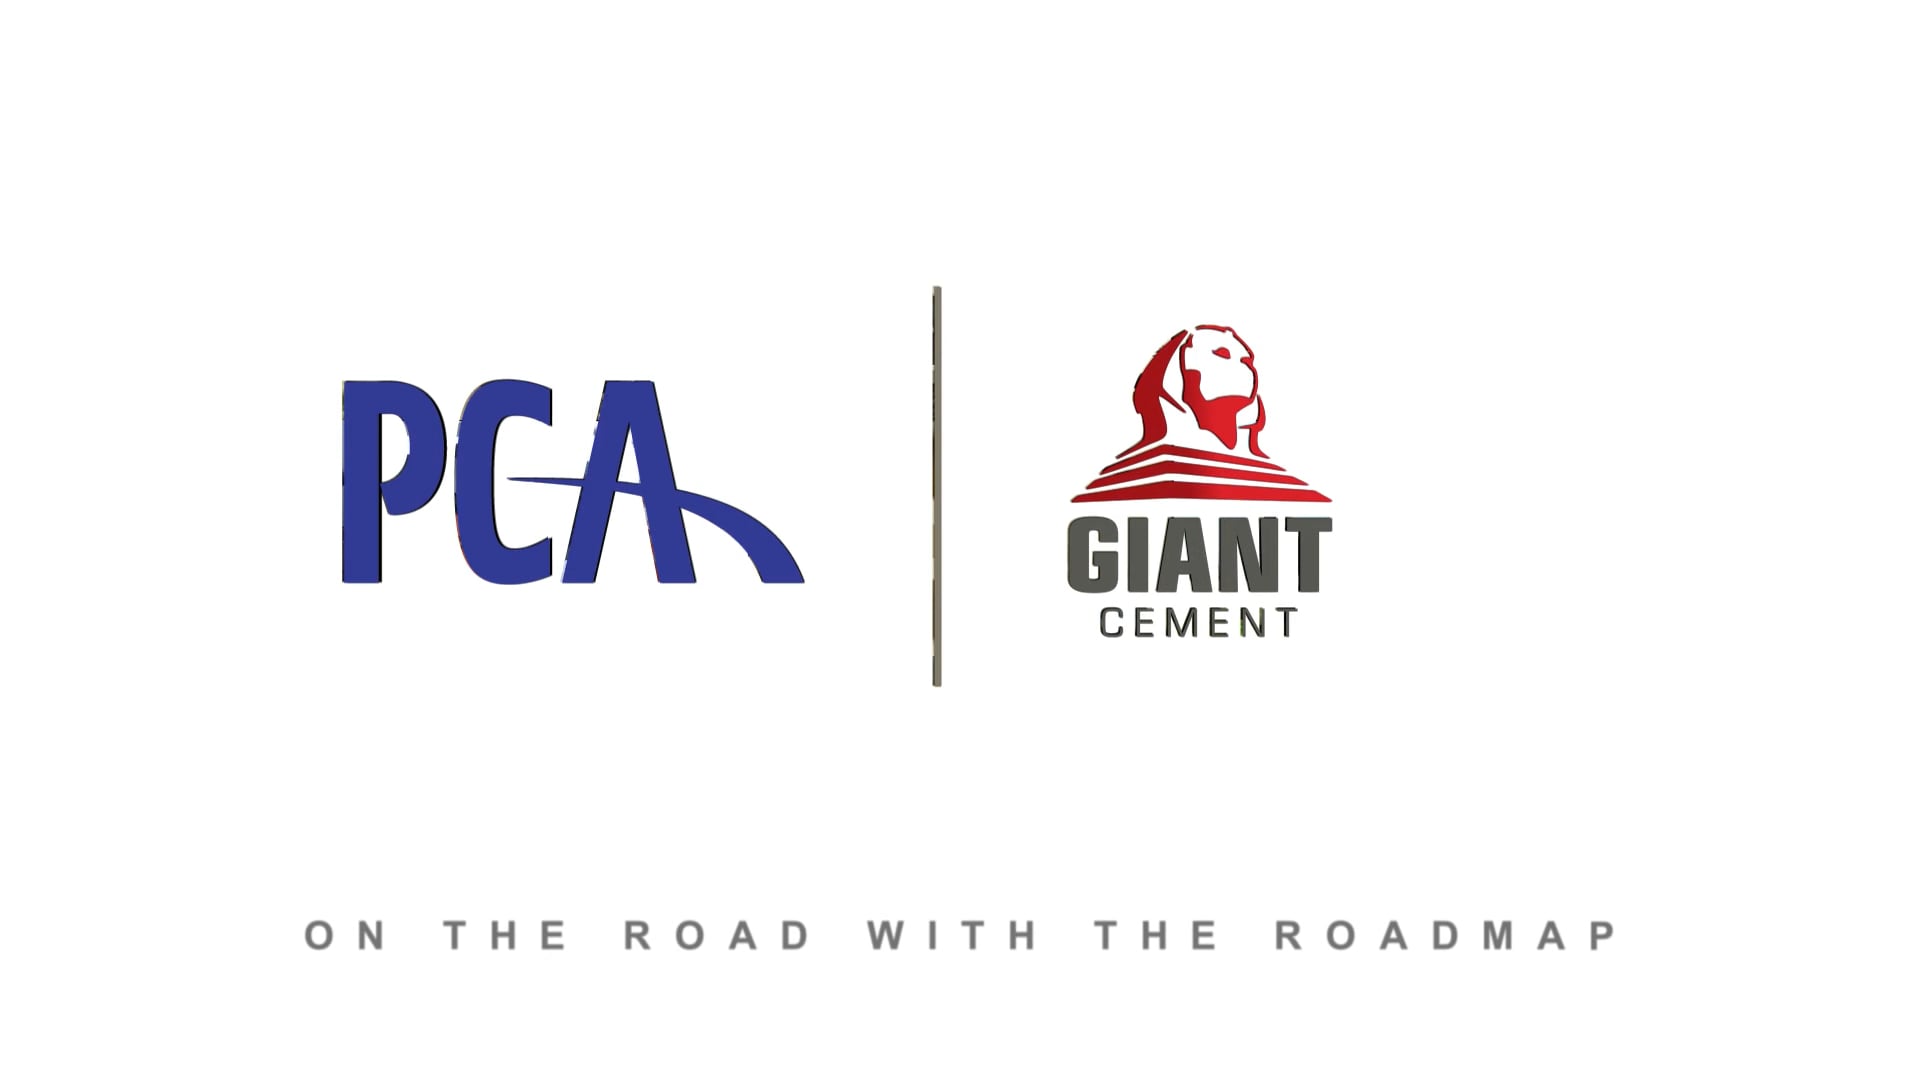 Giant Cement: Sustainability